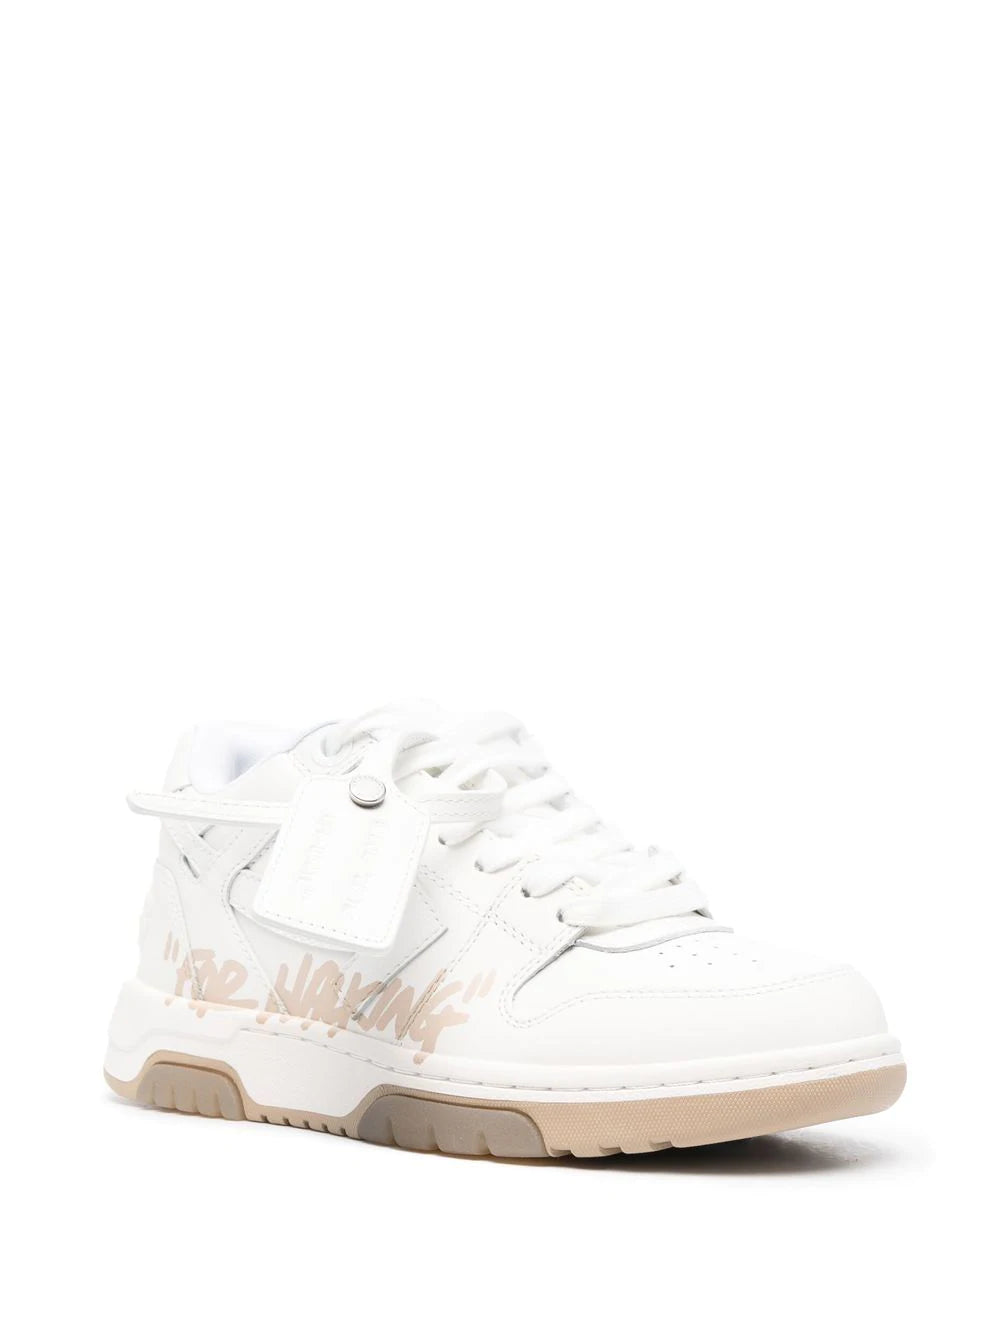 OFF-WHITE WOMEN Out Of Office "FOR WALKING" Sneakers White/Sand - MAISONDEFASHION.COM